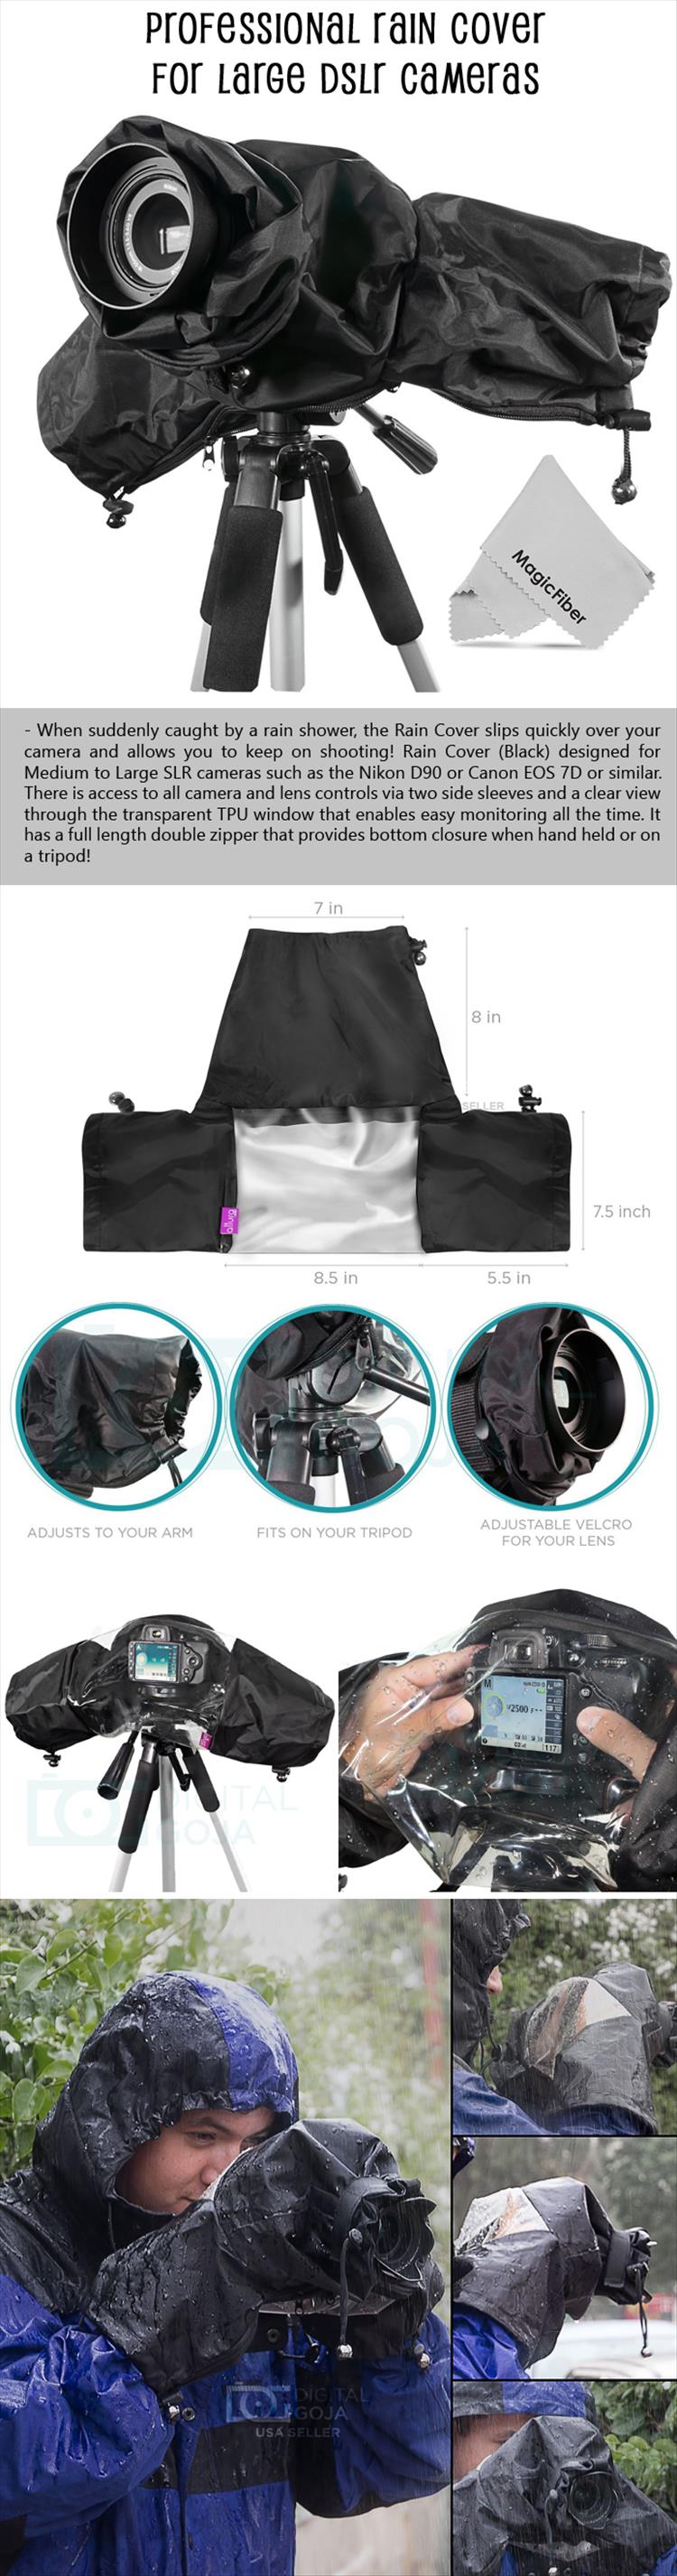 Professional Rain Cover for Large DSLR Cameras